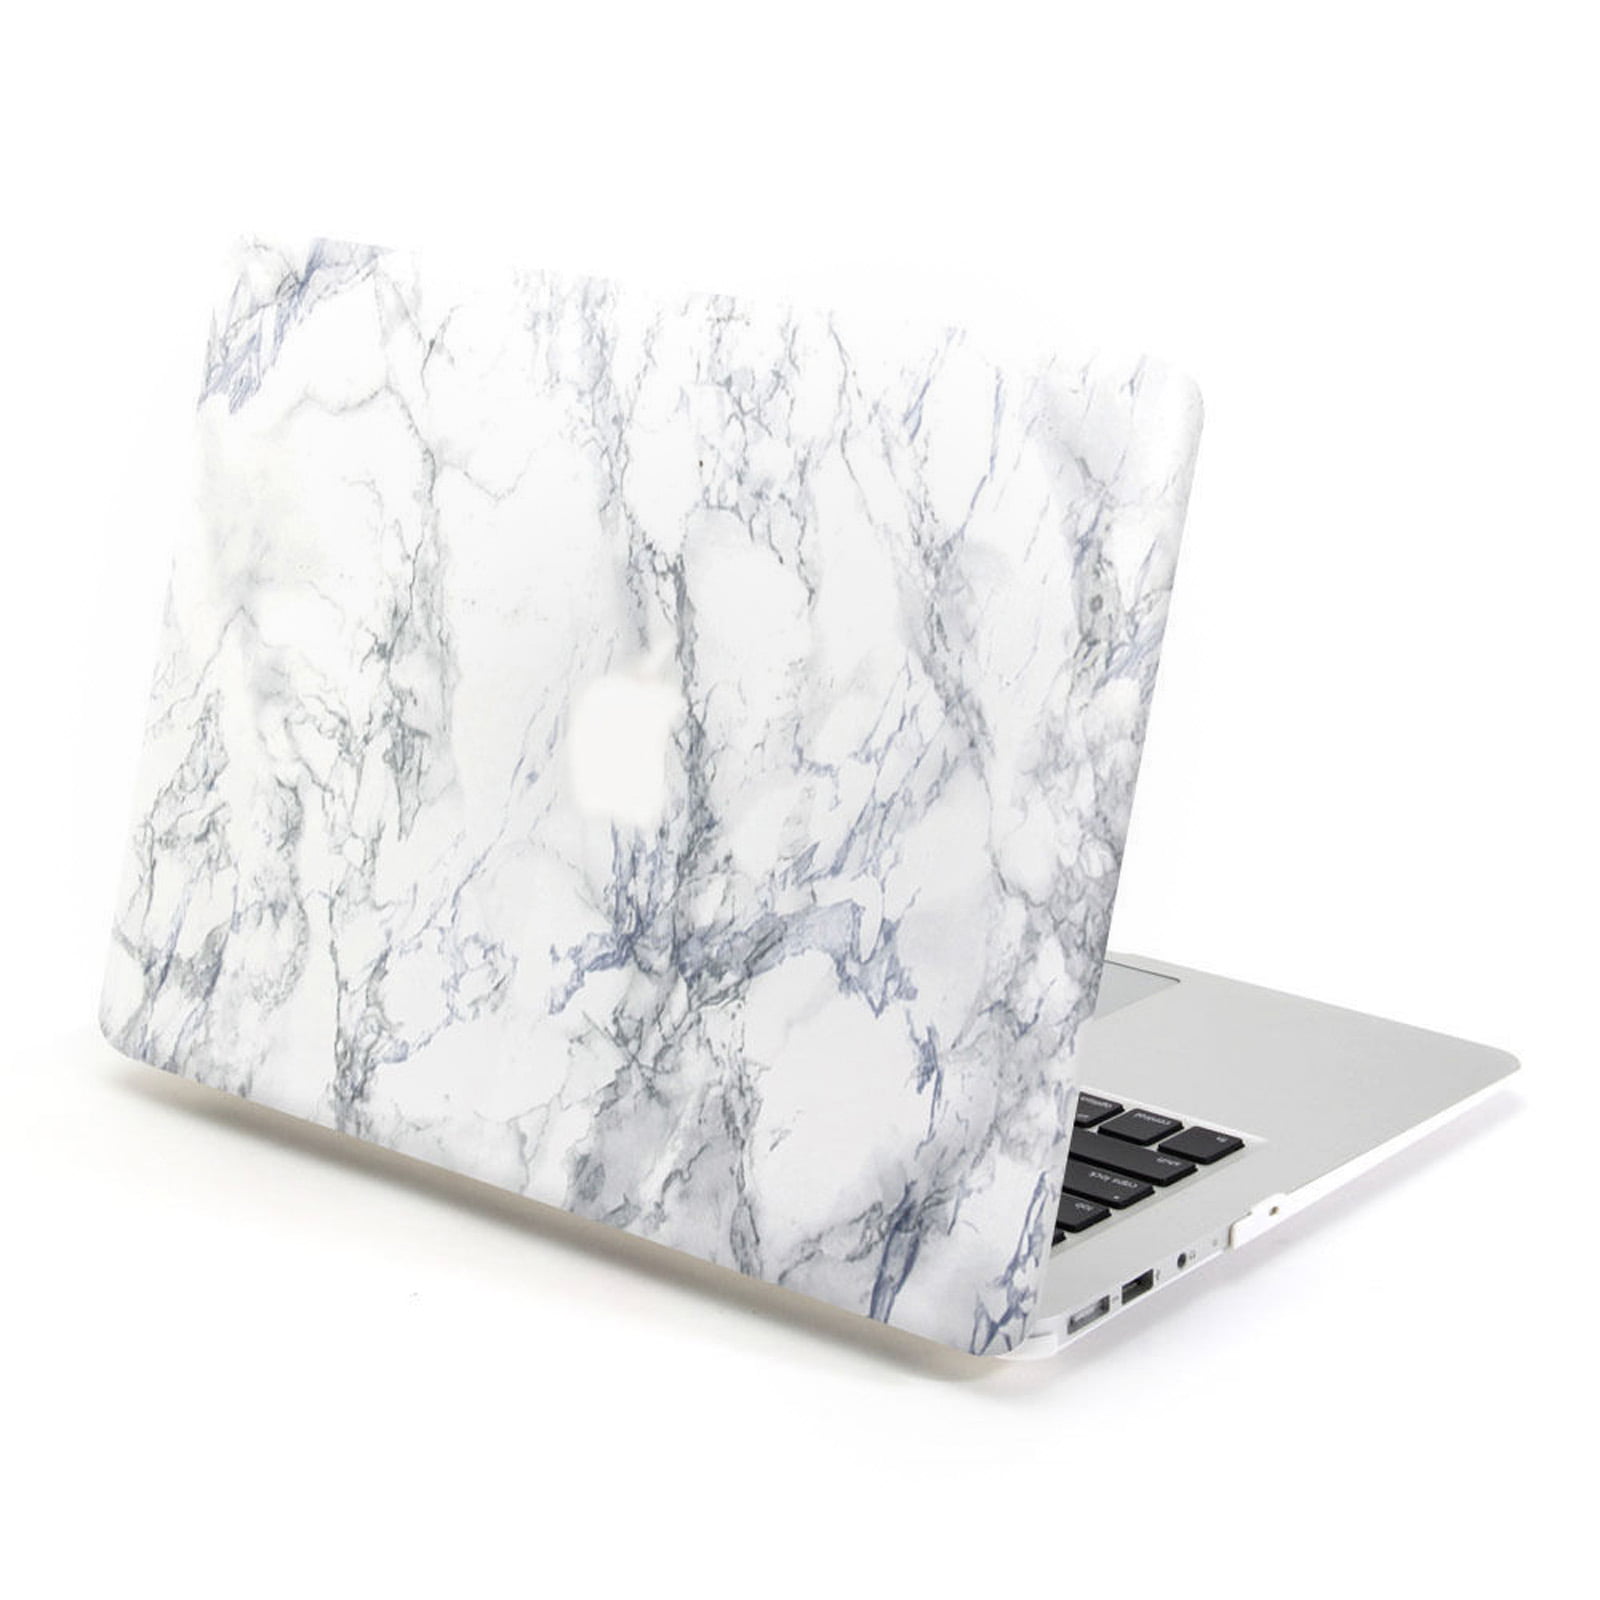 Macbook Air 11 Case Topinno Hard Case Print Frosted for MacBook Air 11 inch - Black/White Marble Pattern Rubber Coated Hard Shell Case Cover&Keyboard Cover Skin&Screen Protector Model: A1370/A1465 